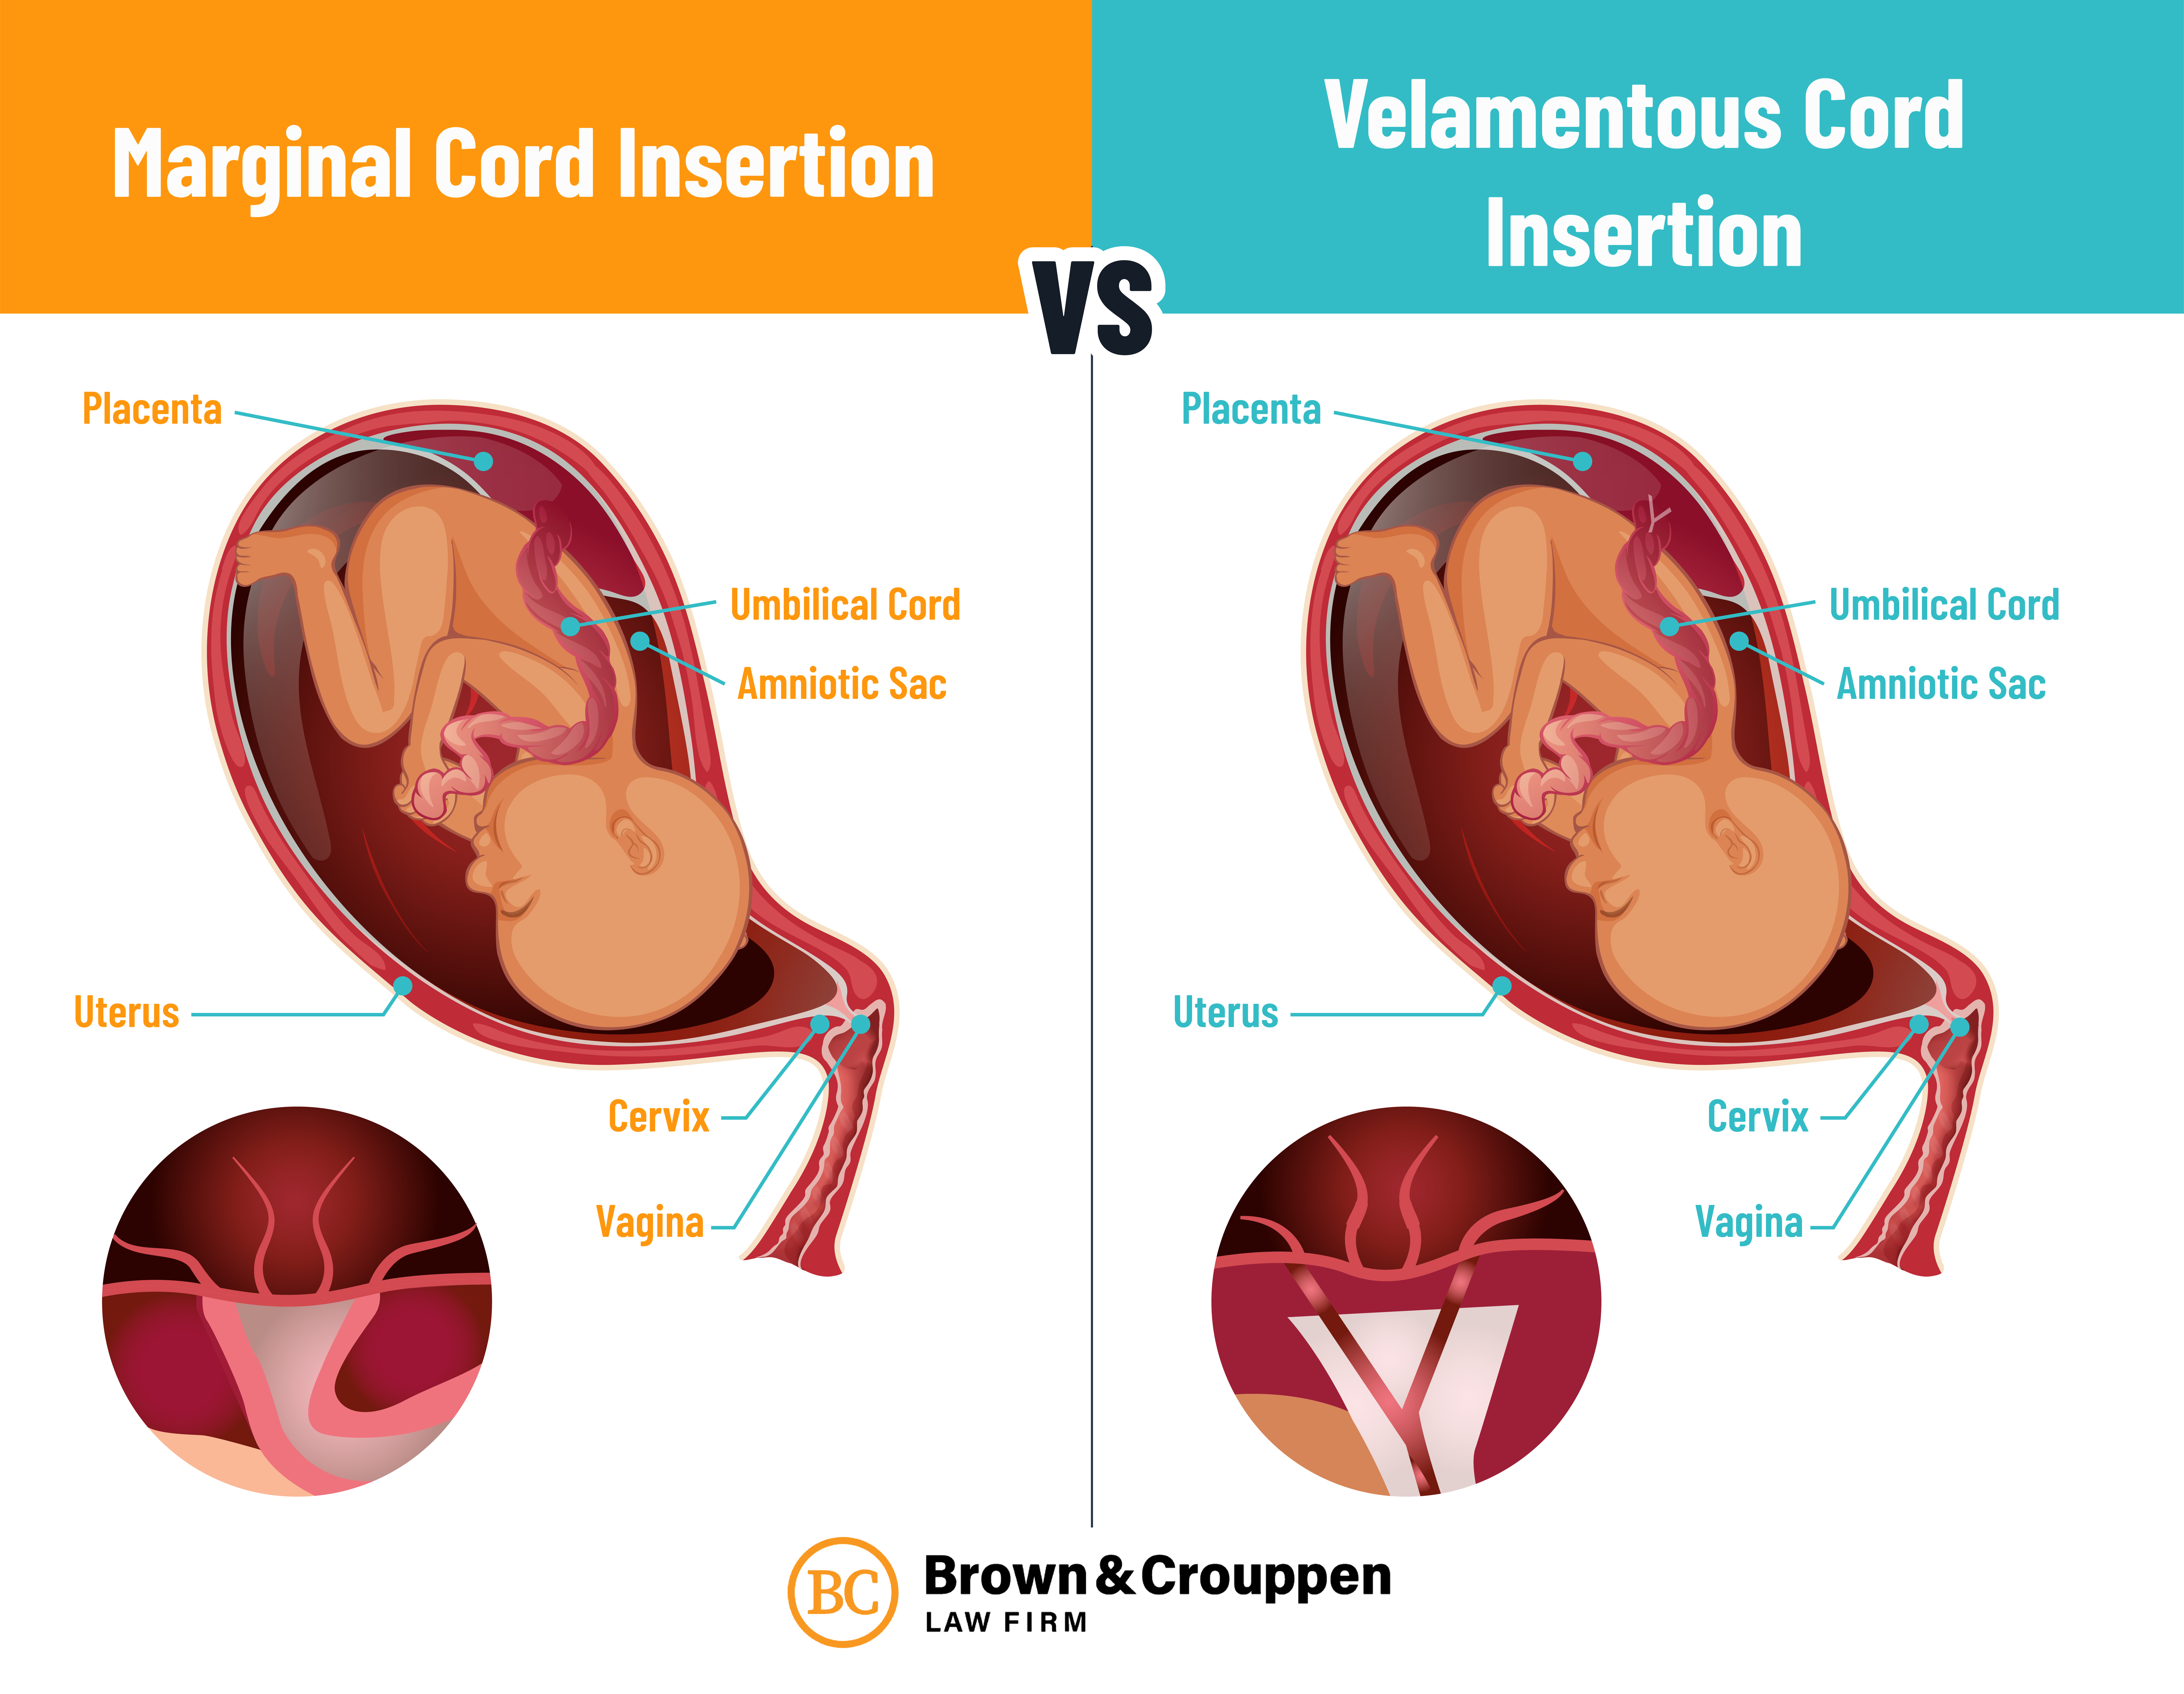 Infographic by Brown & Crouppen displaying the difference between Marginal Cord Insertion and Velamentous Cord Insertion - What is Marginal Cord Insertion